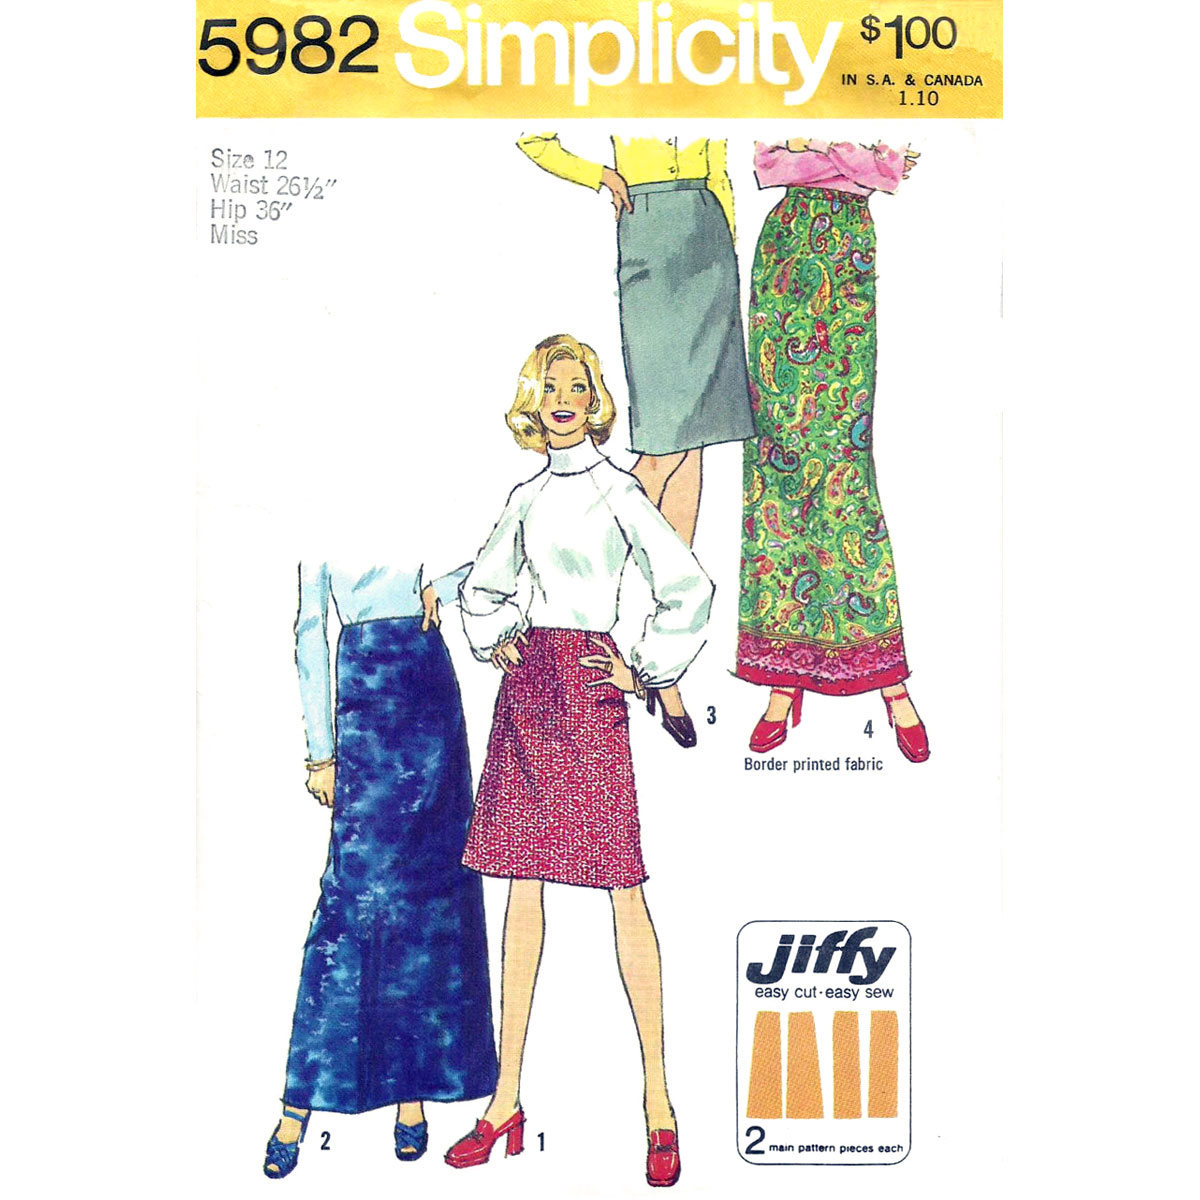 Simplicity 5982 skirt sewing pattern